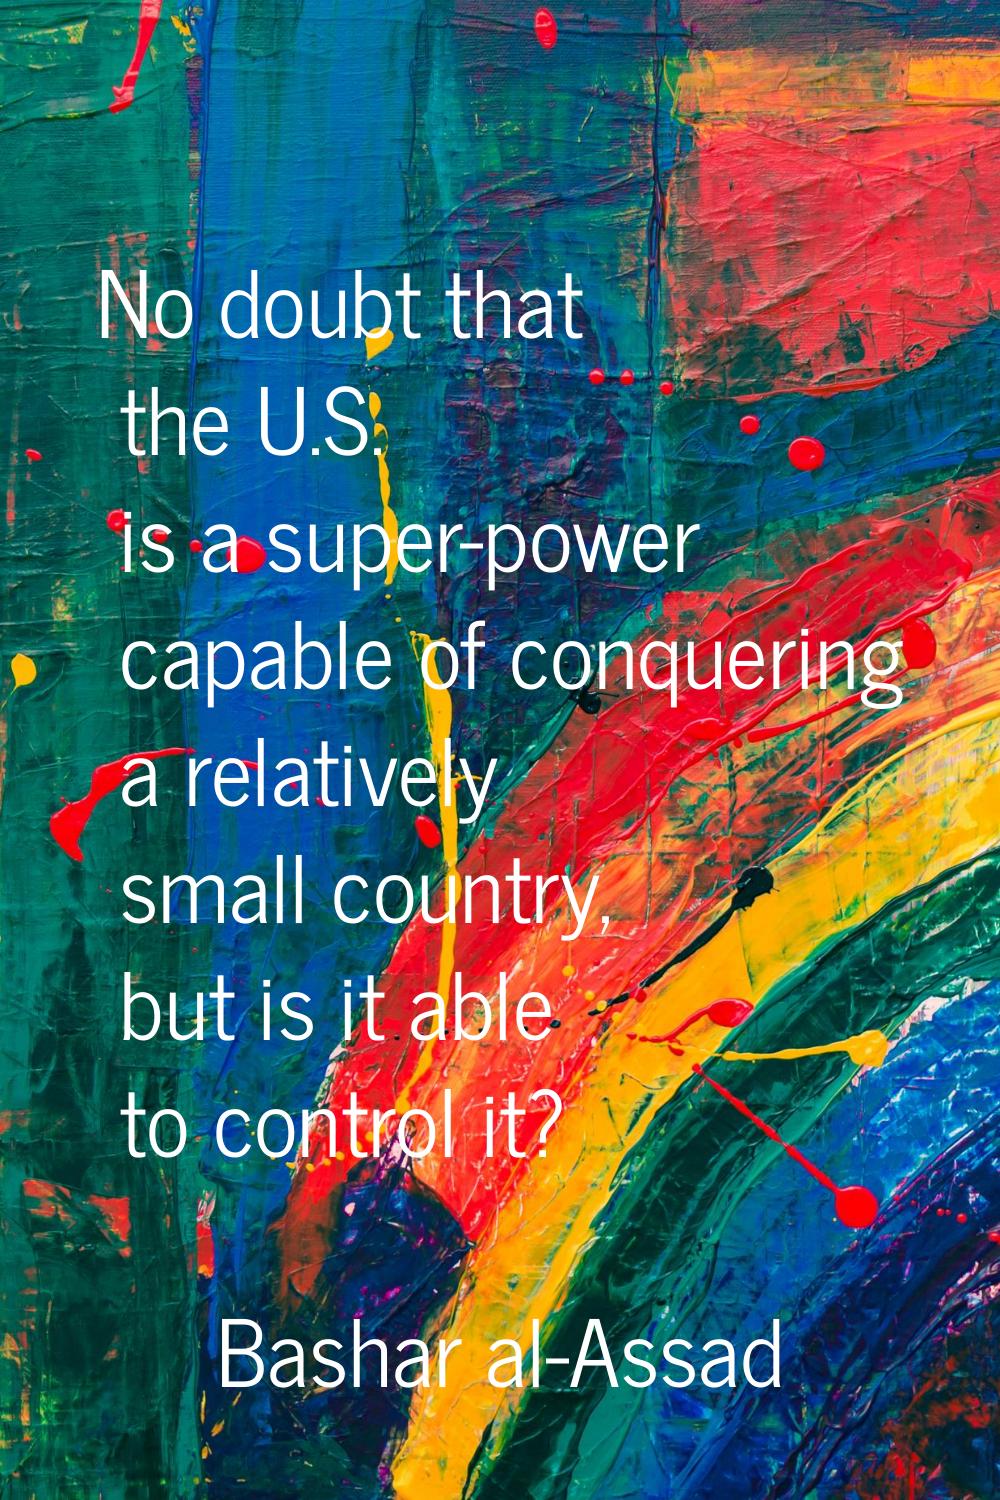 No doubt that the U.S. is a super-power capable of conquering a relatively small country, but is it